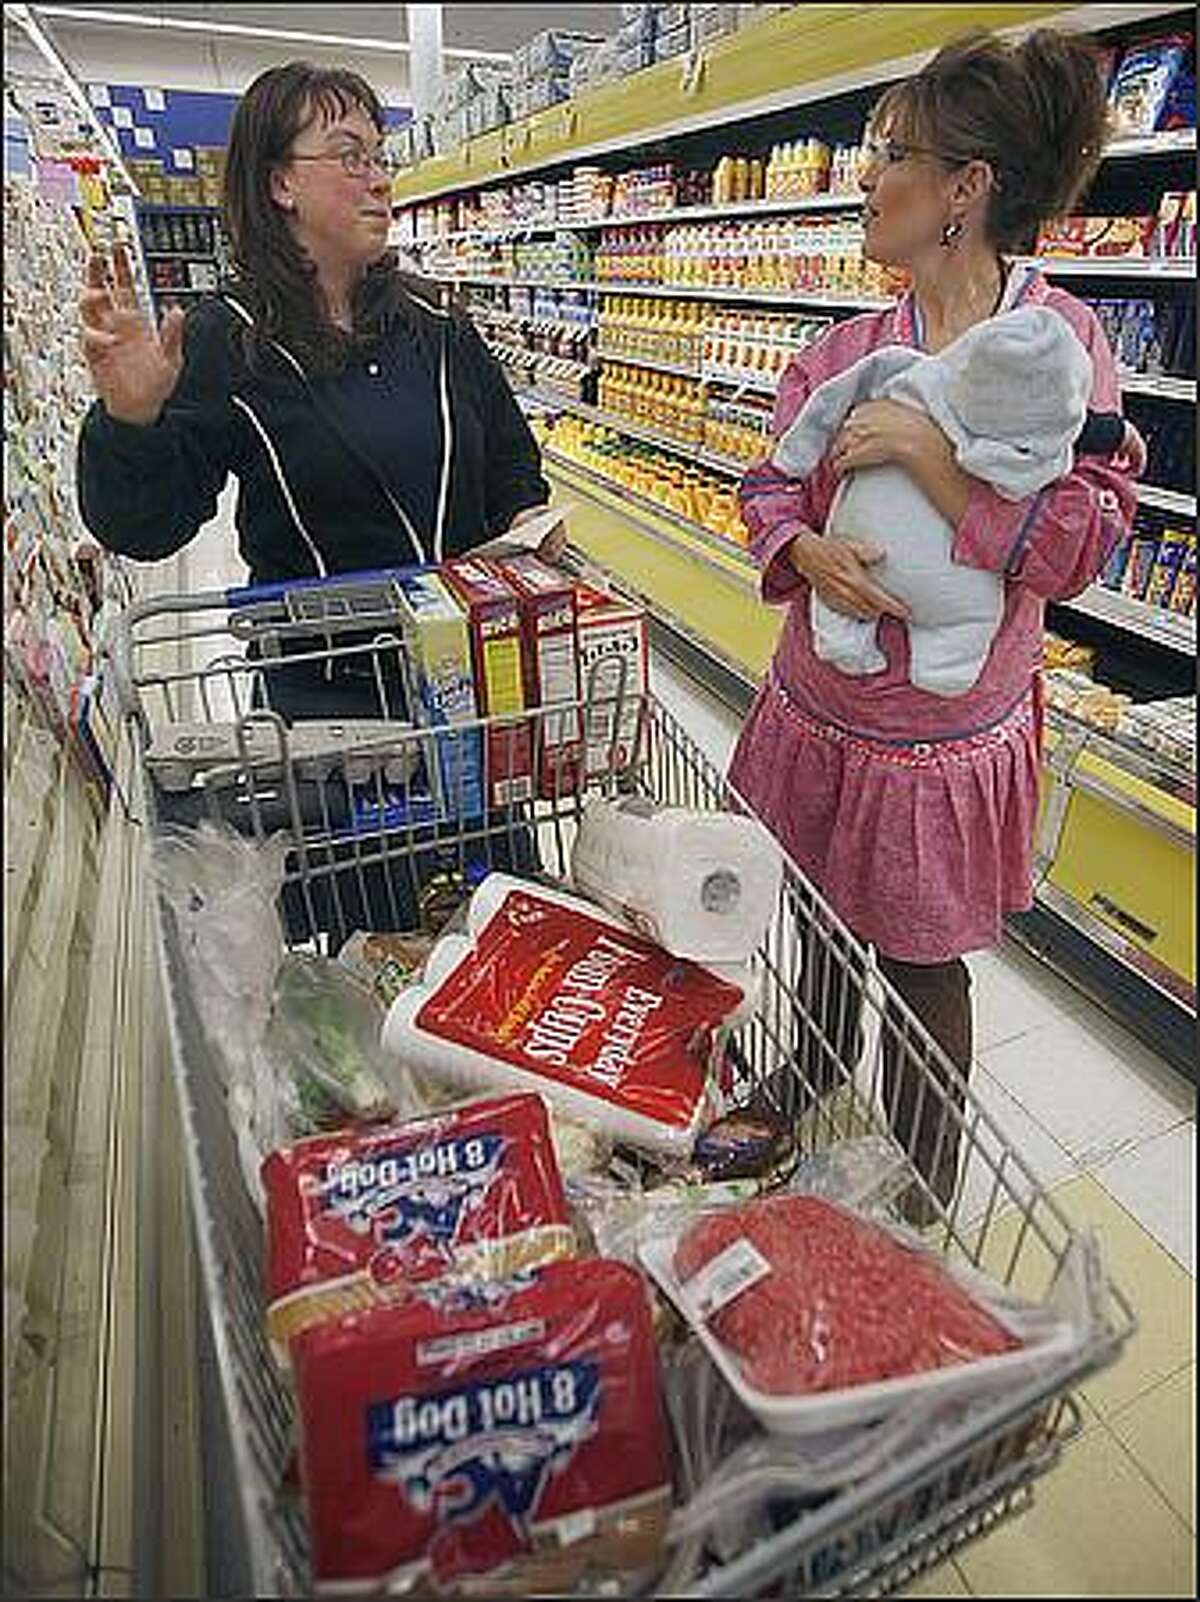 In this Monday, June 30, 2008 file photo, Laurie Serino, left, talks about the high food prices with Alaska Gov. Sarah Palin in Barrow, Alaska. AP Photo/Al Grillo